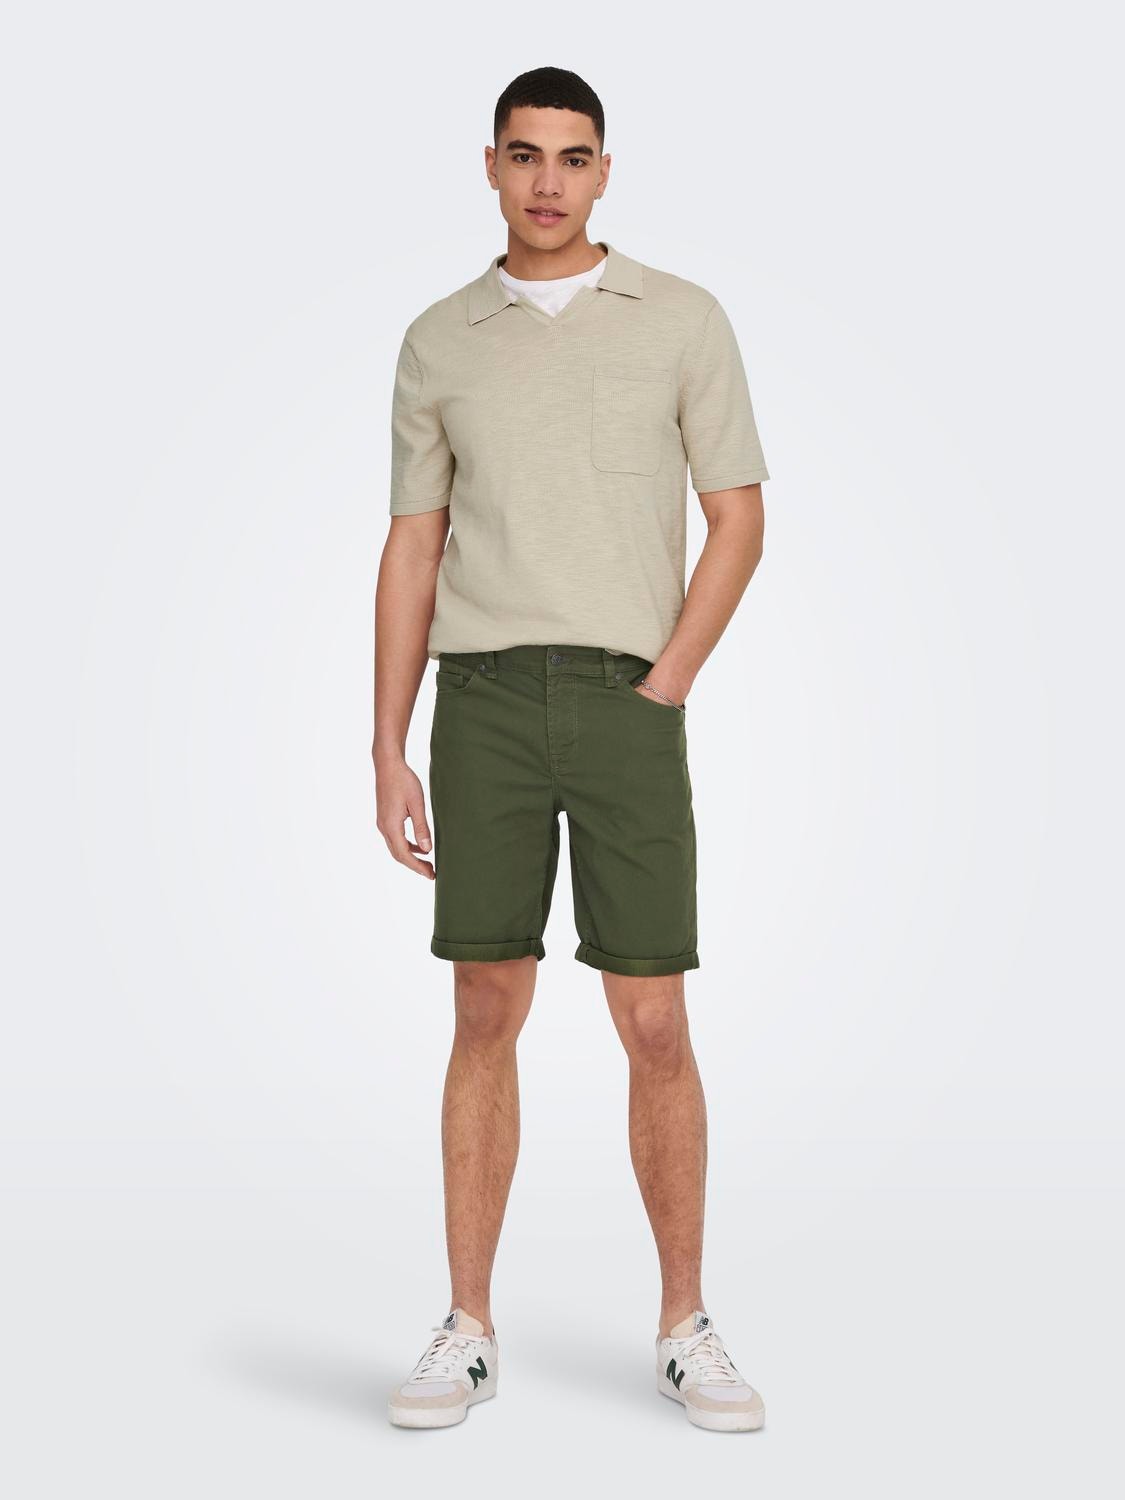 ONLY & SONS Short Sleeved Knit With Resort Collar -Pumice Stone - 22019517